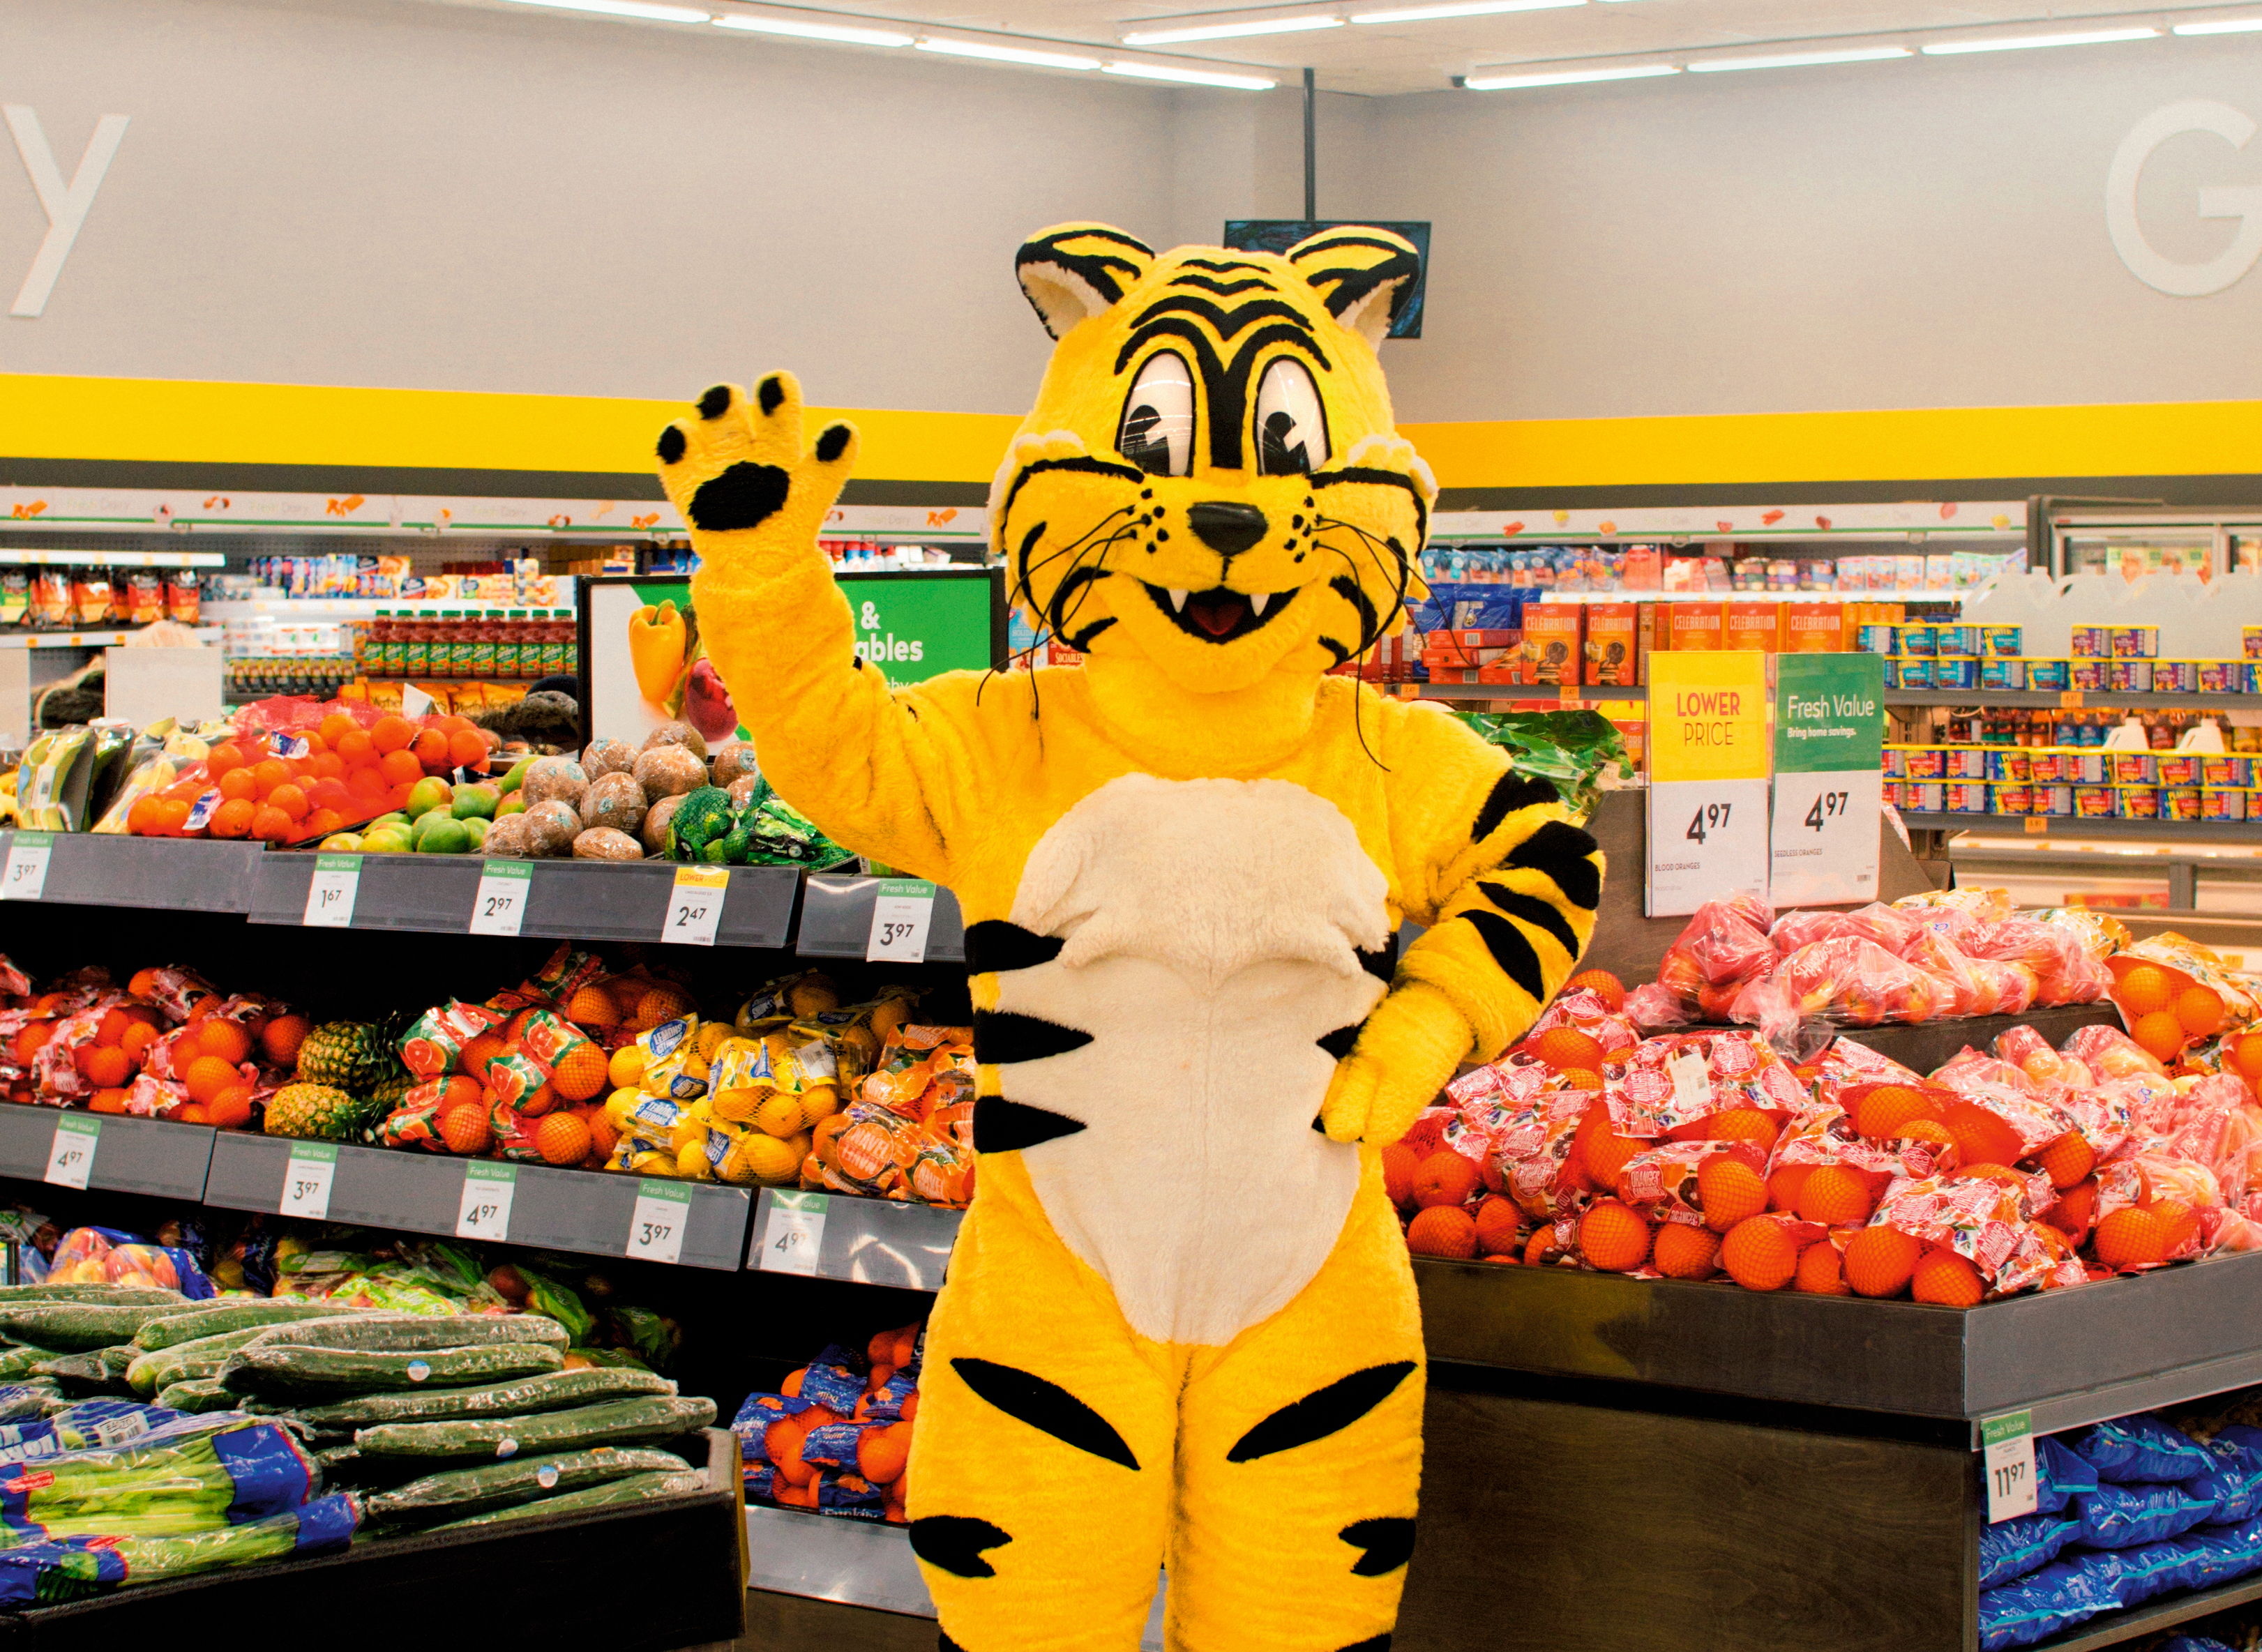 Giant Tiger is proud to be the discount chain with heart - The